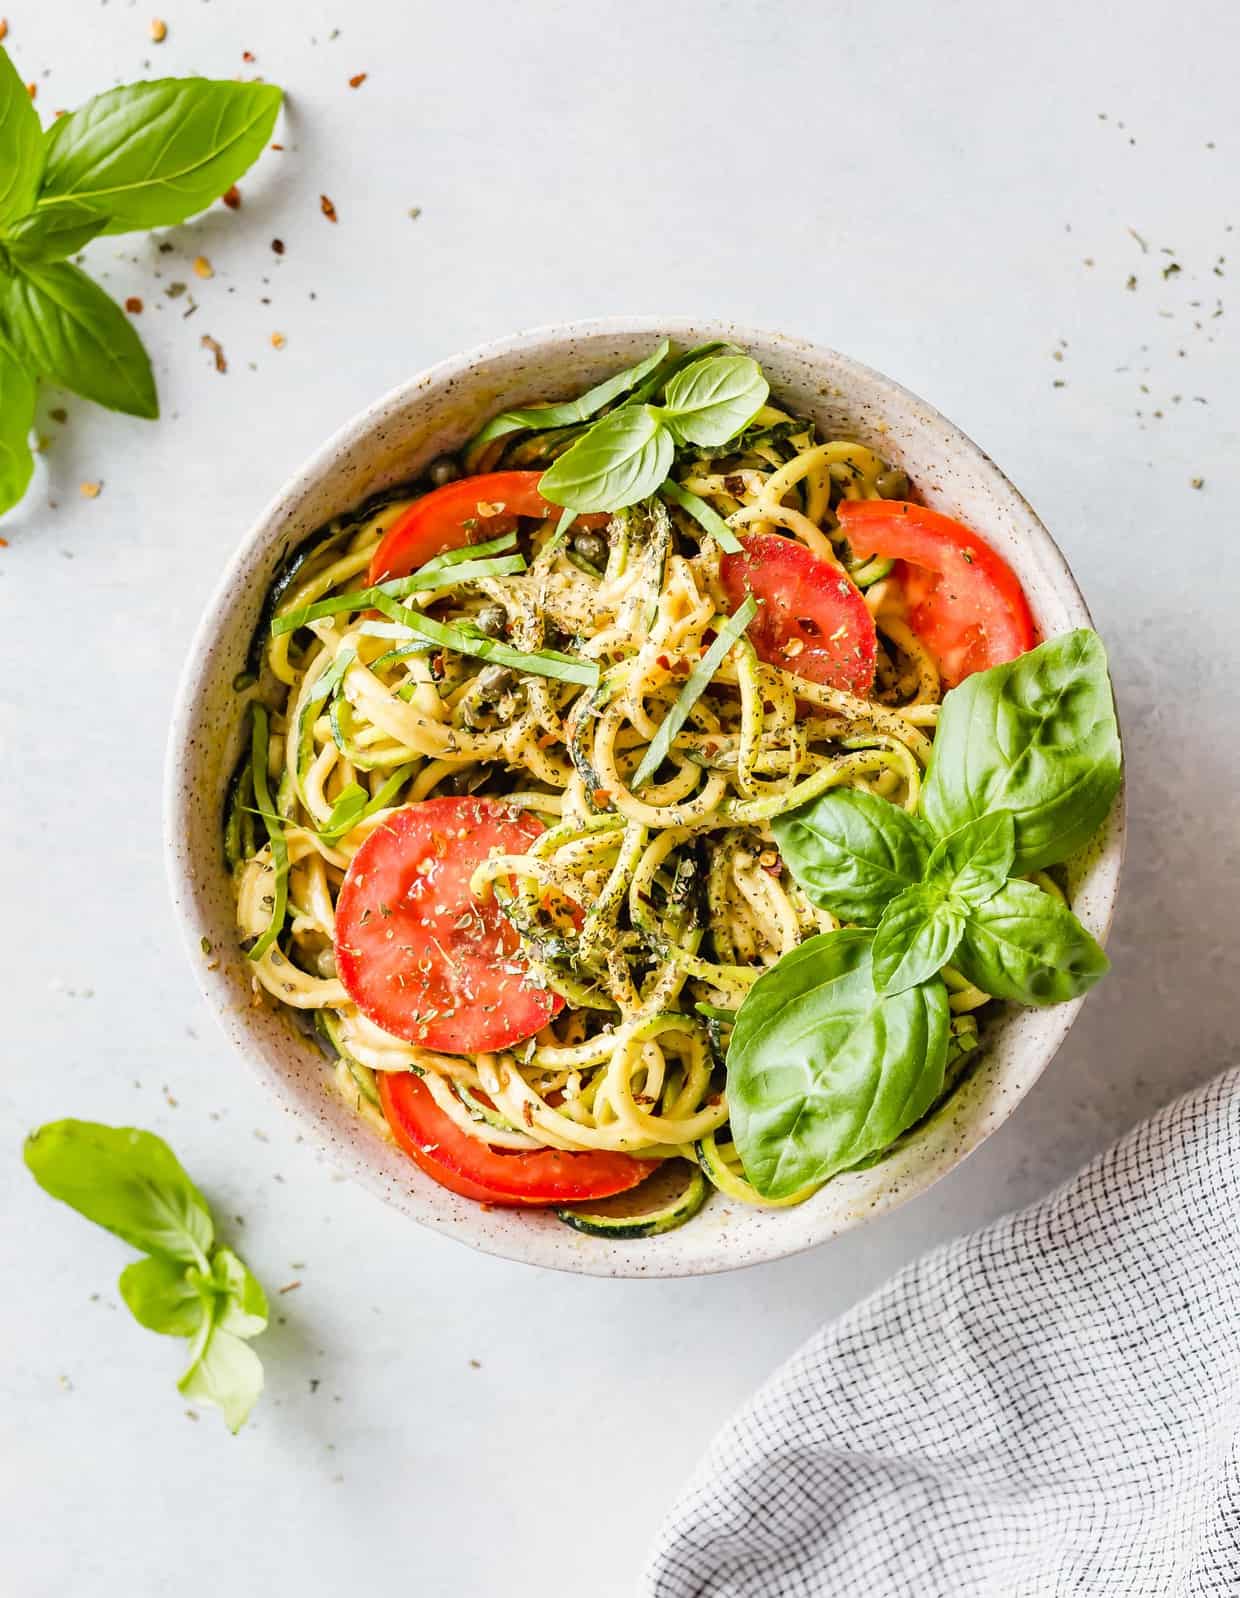 5-Minute Cheesy Zucchetti Bowl is the perfect zucchini noodles recipe! It's a fun and delicious way to eat your veggies! This delicious gluten free bowl is low carb too!